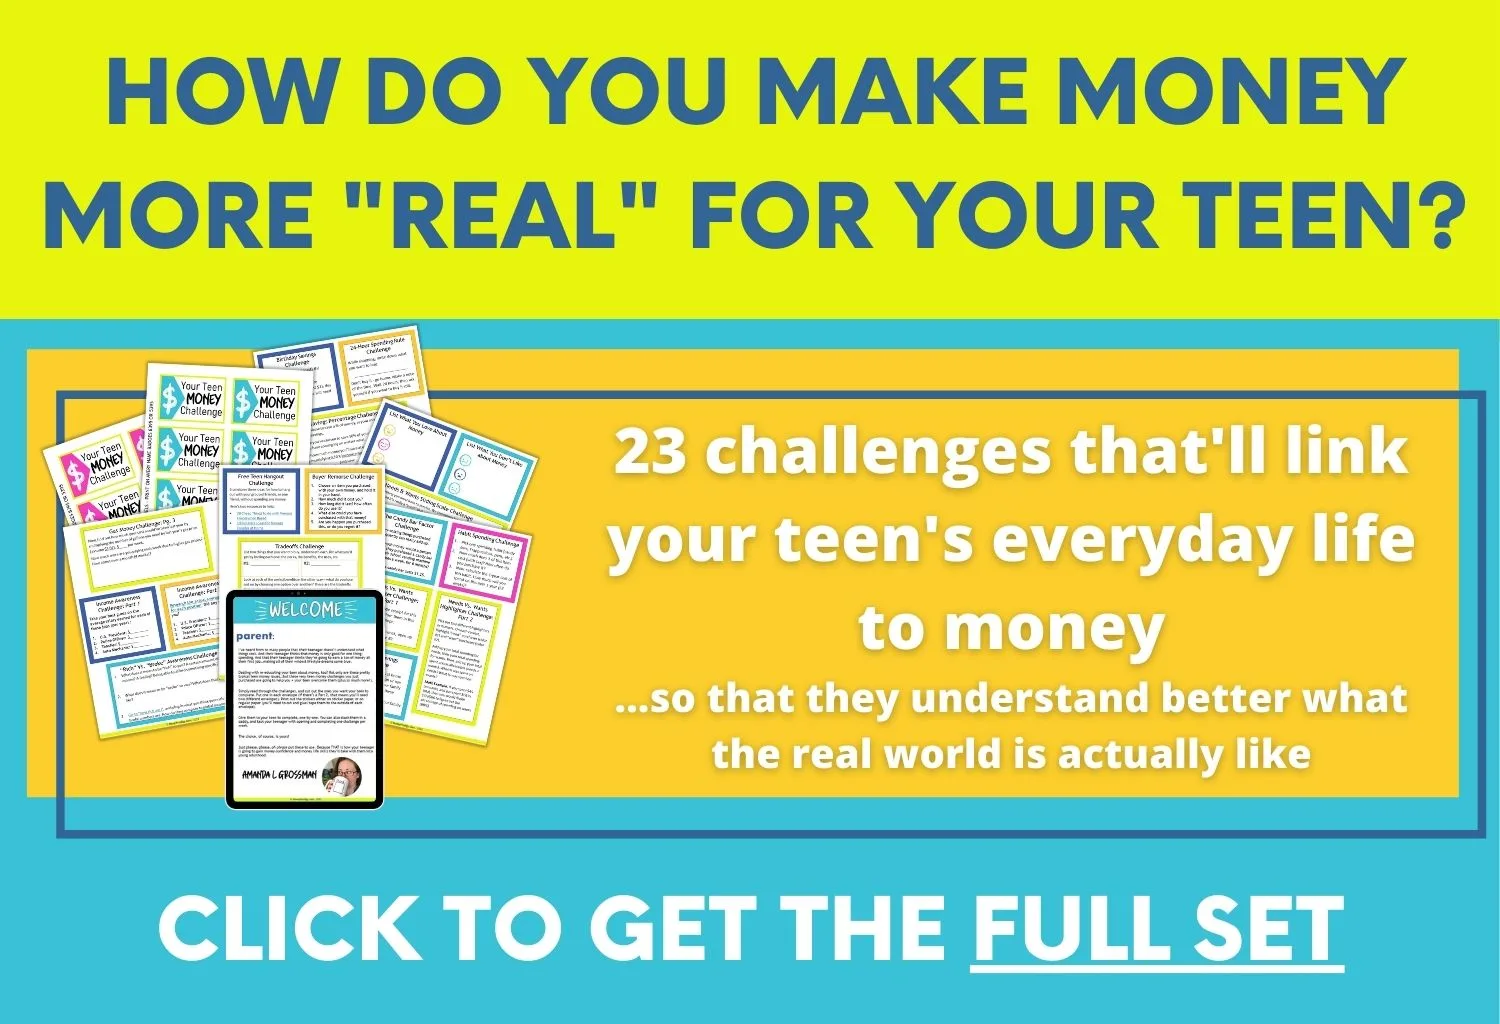 colorful, fun box showing all the pages in the teen money challenges, text overlay "how do you make money more "real" for your teen? 23 challenges that'll link your teen's everyday life to money"